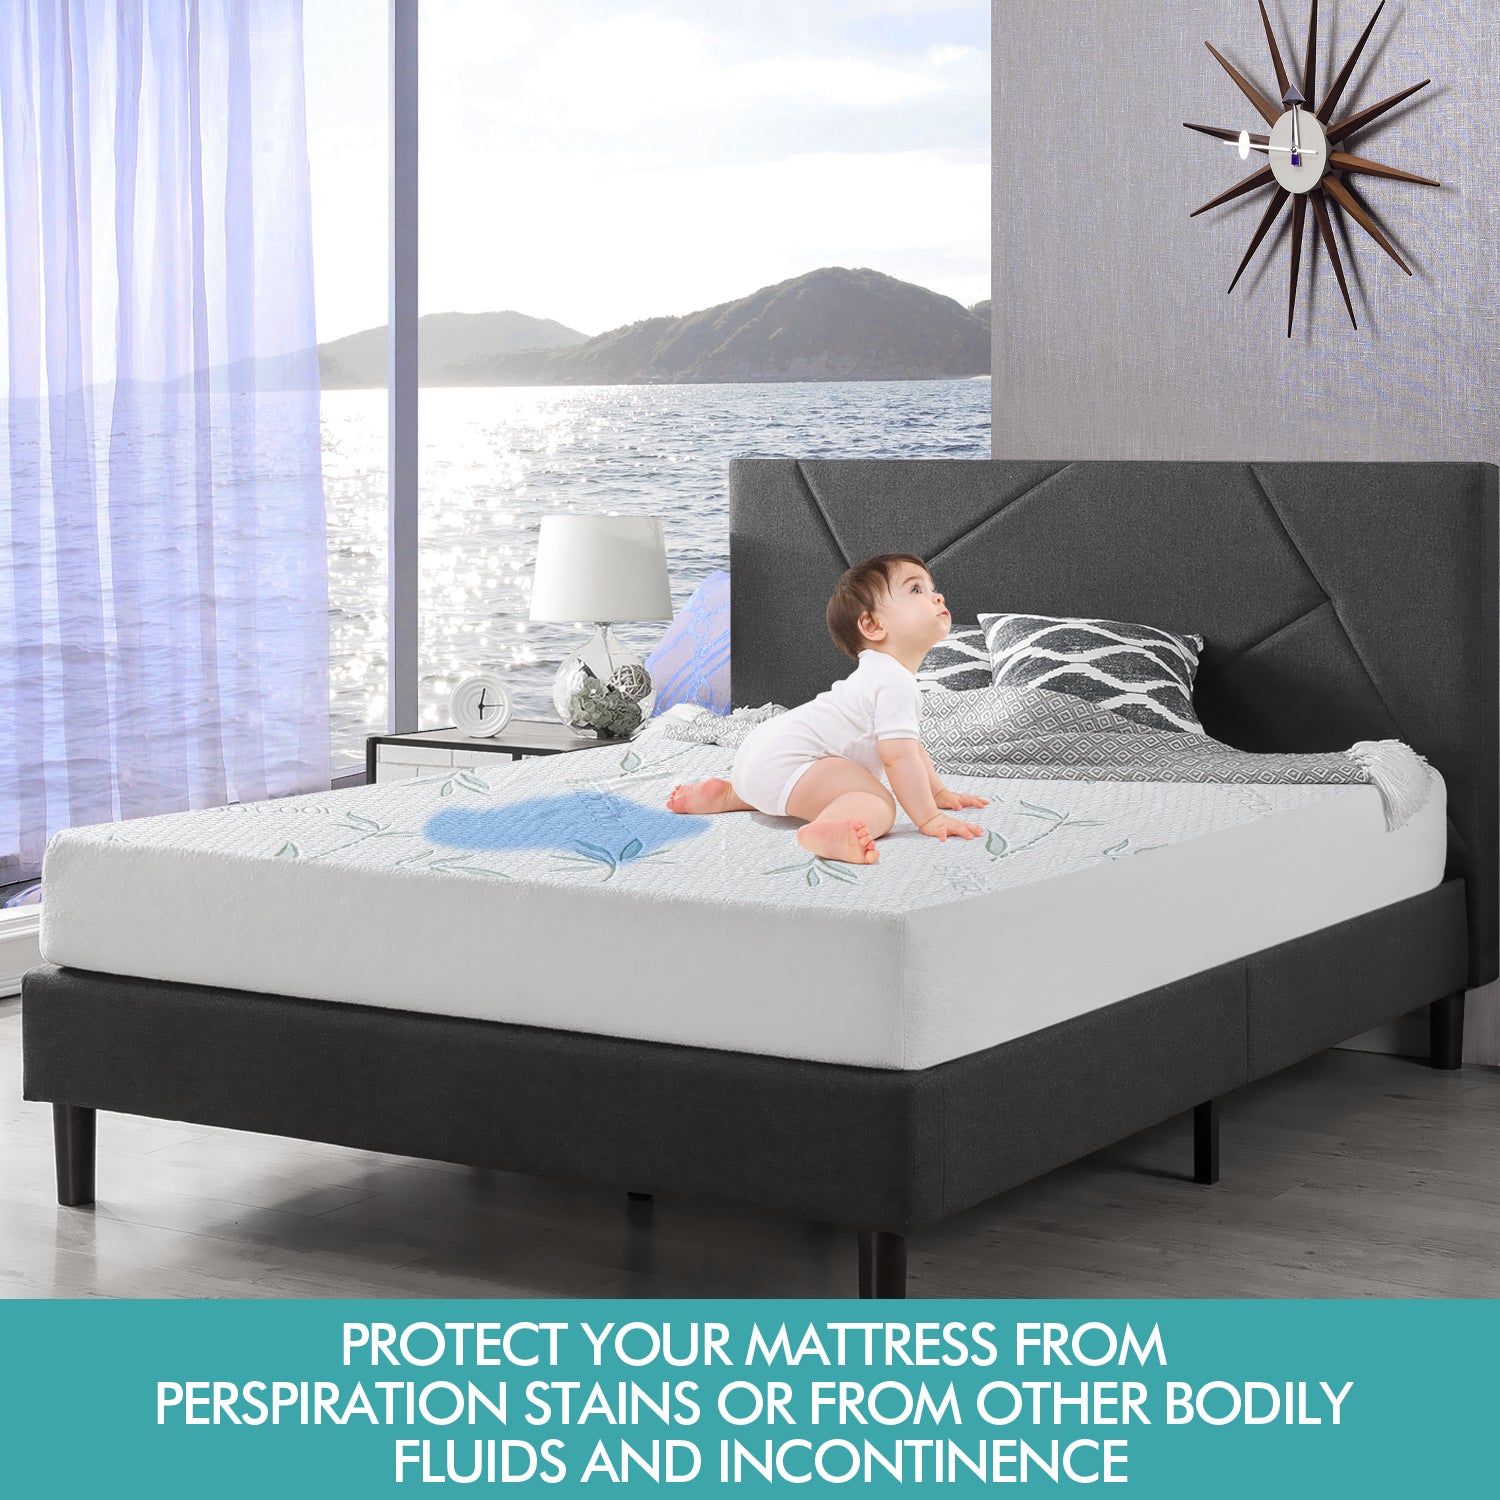 Fitted Waterproof Breathable Bamboo Mattress Protector Super King Size - image8